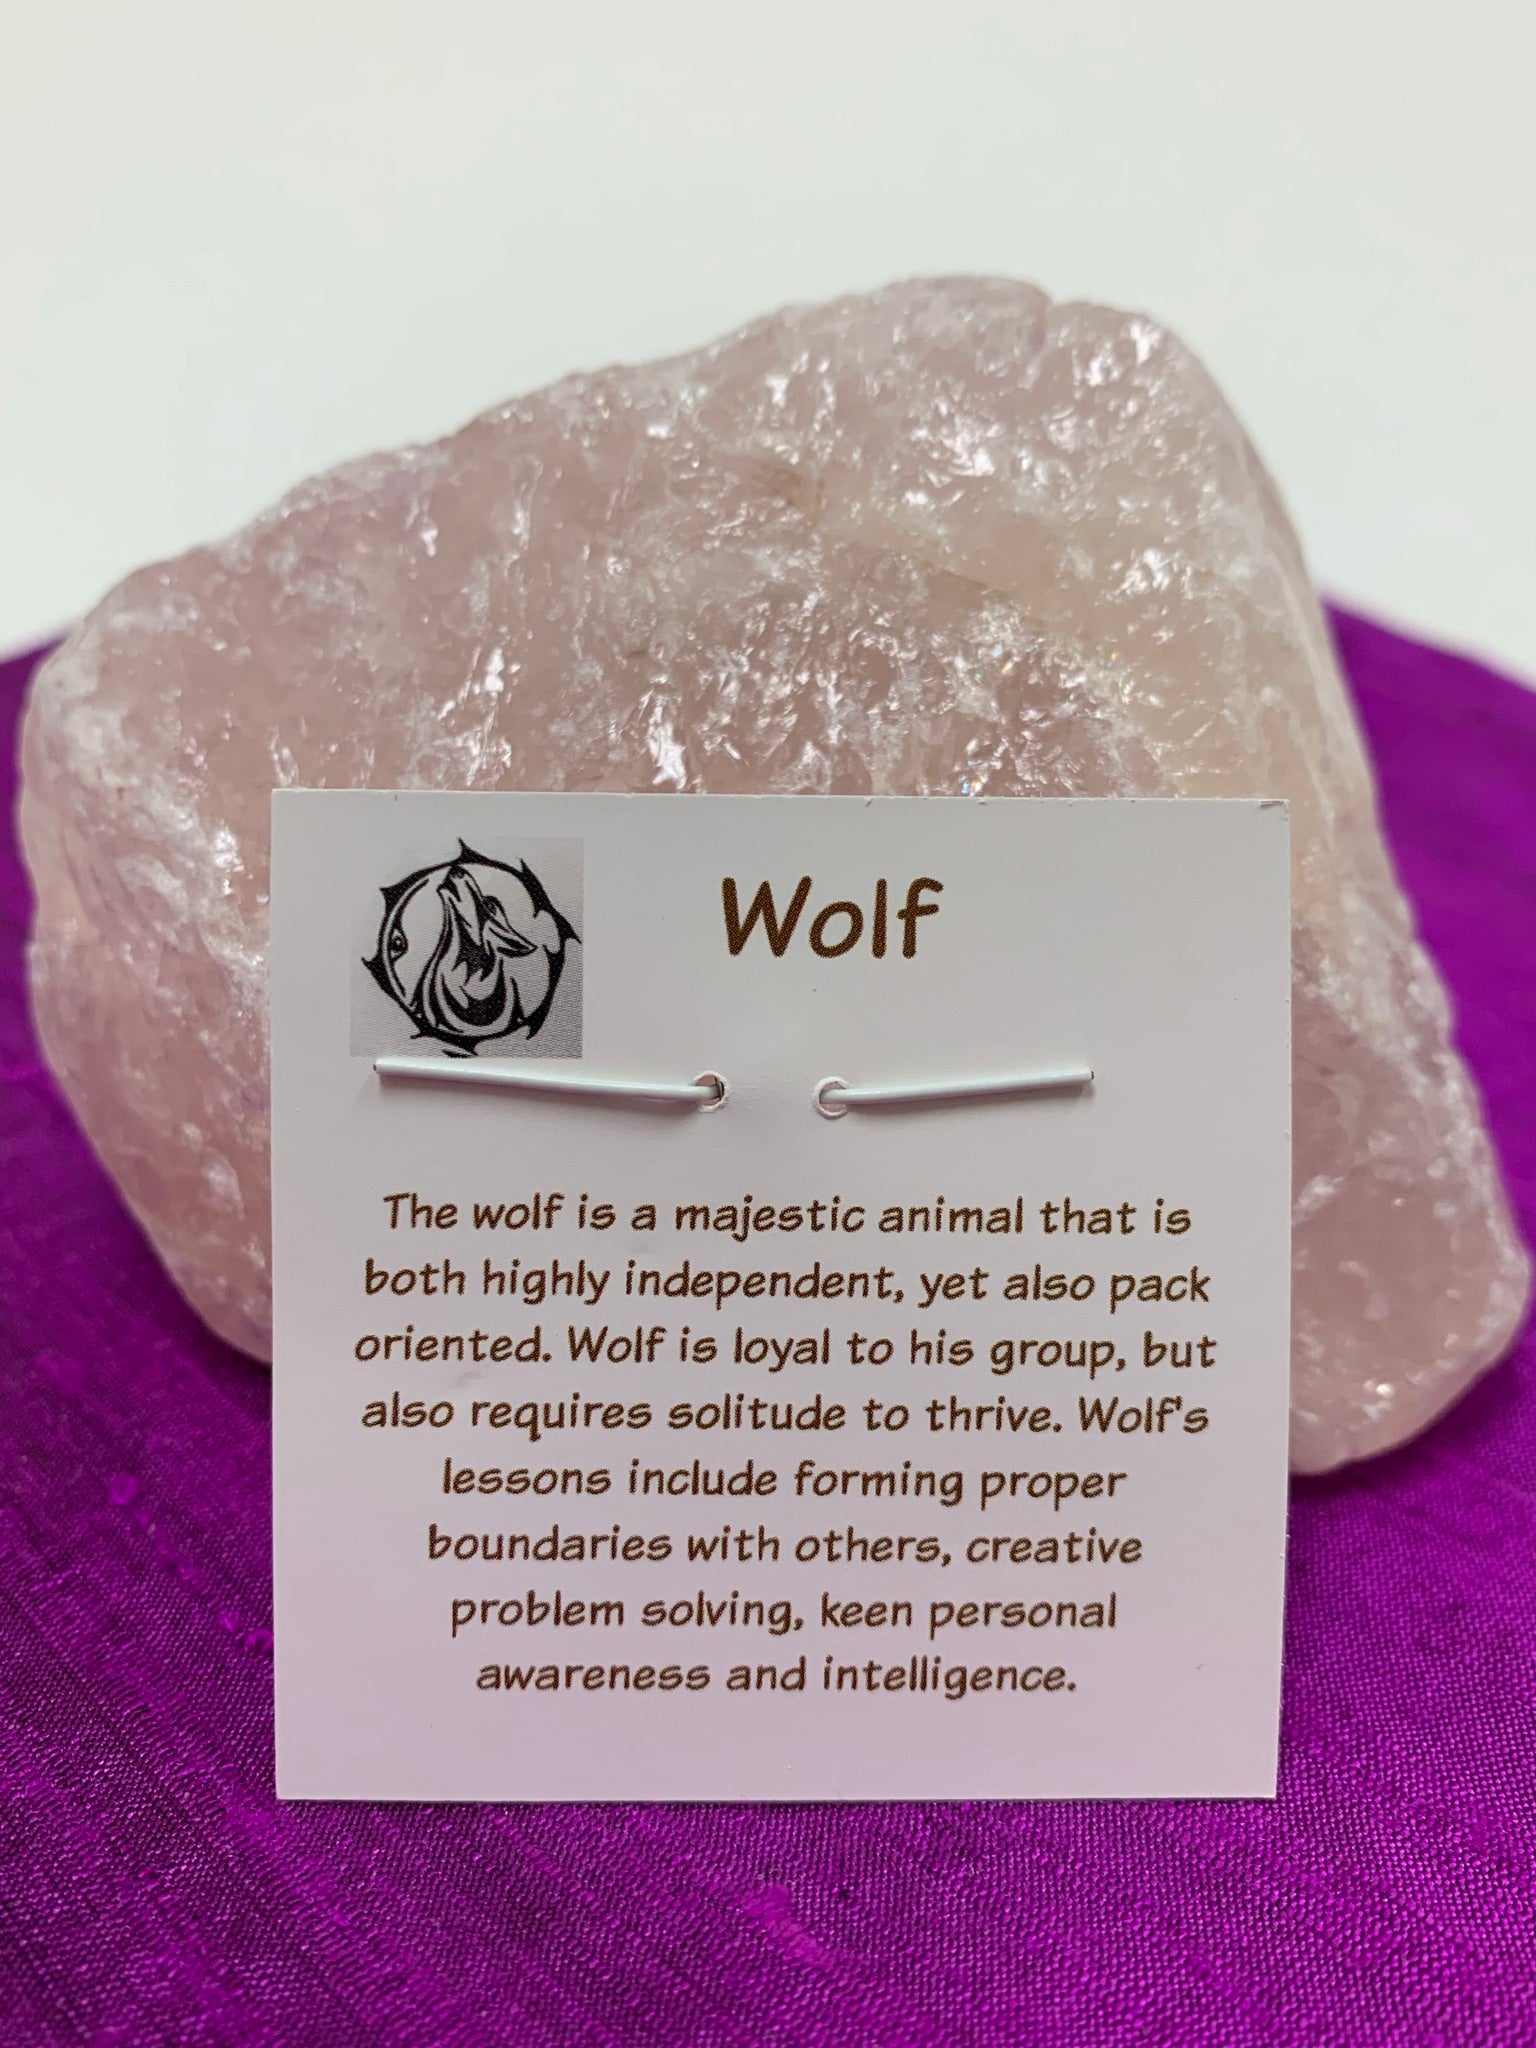 Information about the wolf spirit animal and its lessons, printed on the back of the pendant card, is included with your purchase of the pendant.